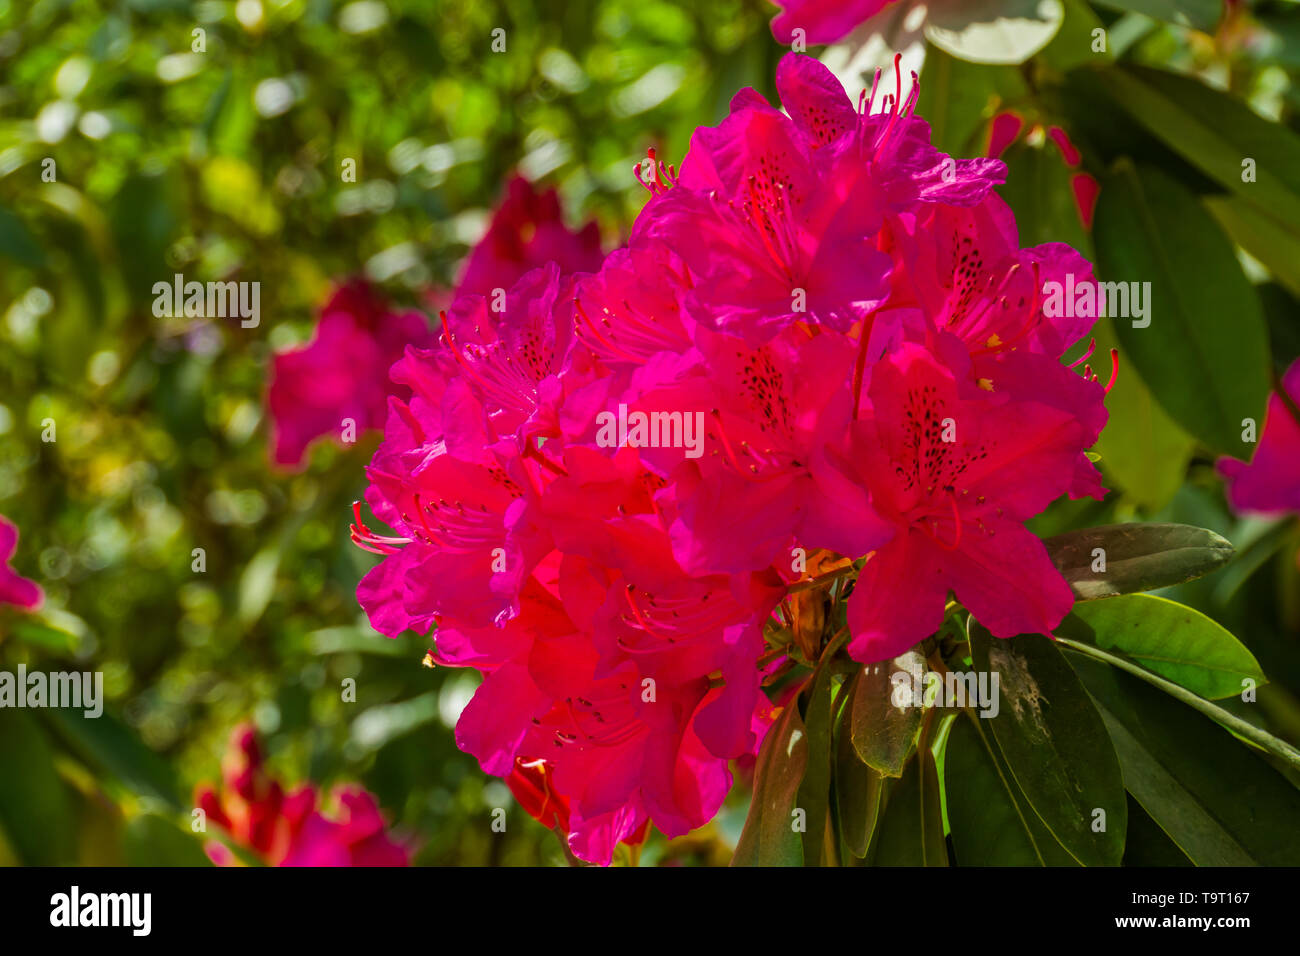 beautiful pink rhododendron flowers in macro closeup, cultivated flowering bush, popular ornamental plant for the garden, nature background Stock Photo